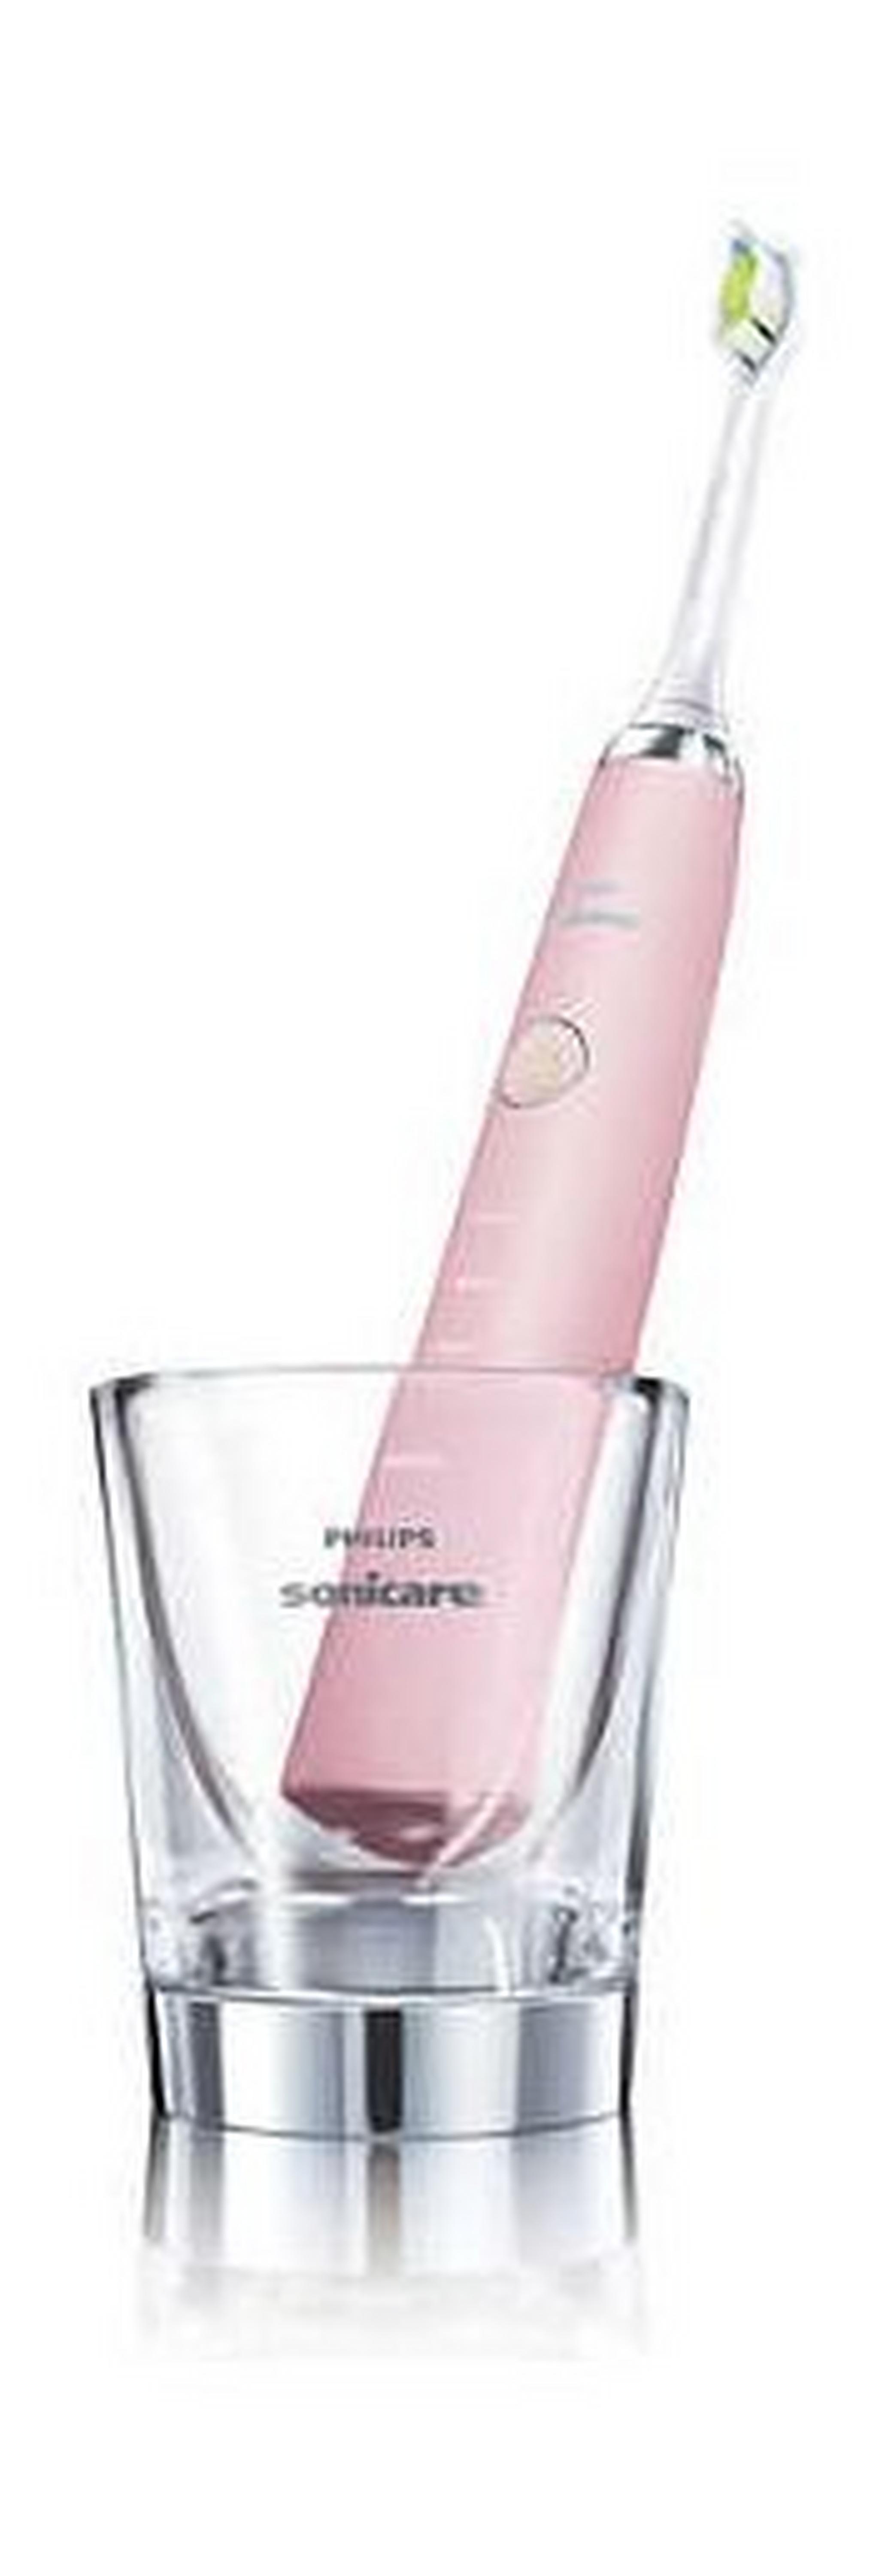 Philips Sonicare DiamondClean Sonic 7 Series Electric Toothbrush (HX9362/67) – Pink